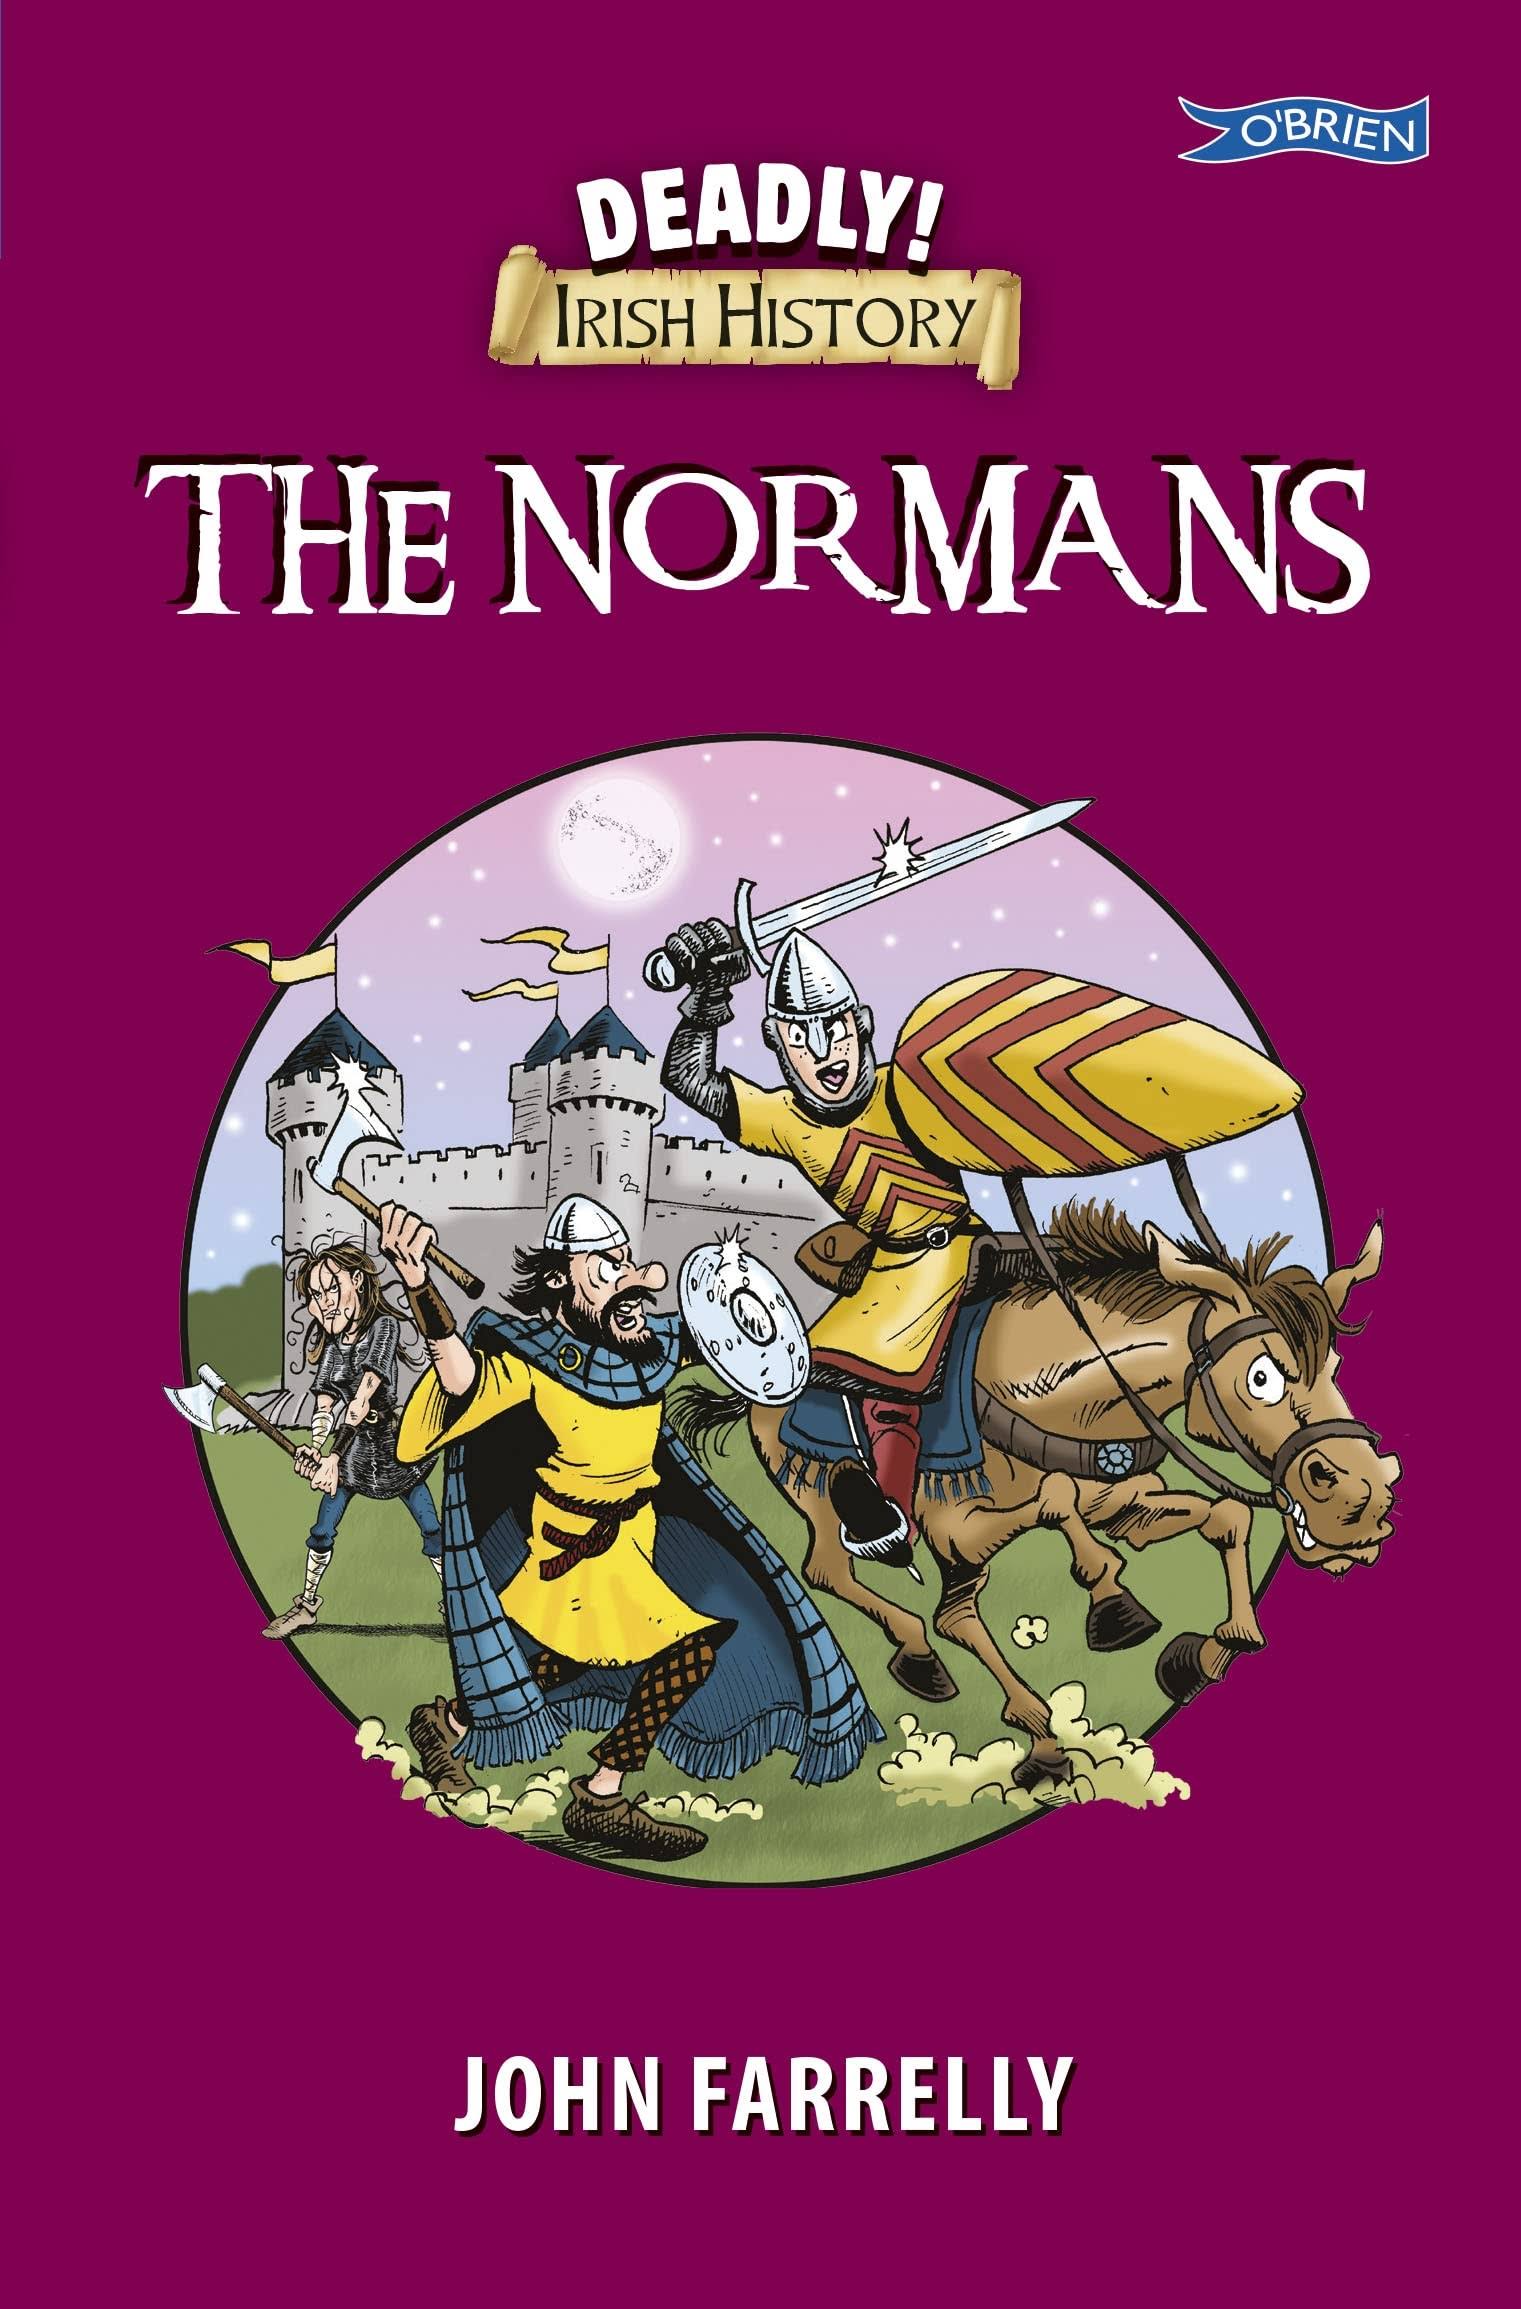 Deadly! Irish History - The Normans by John Farrelly